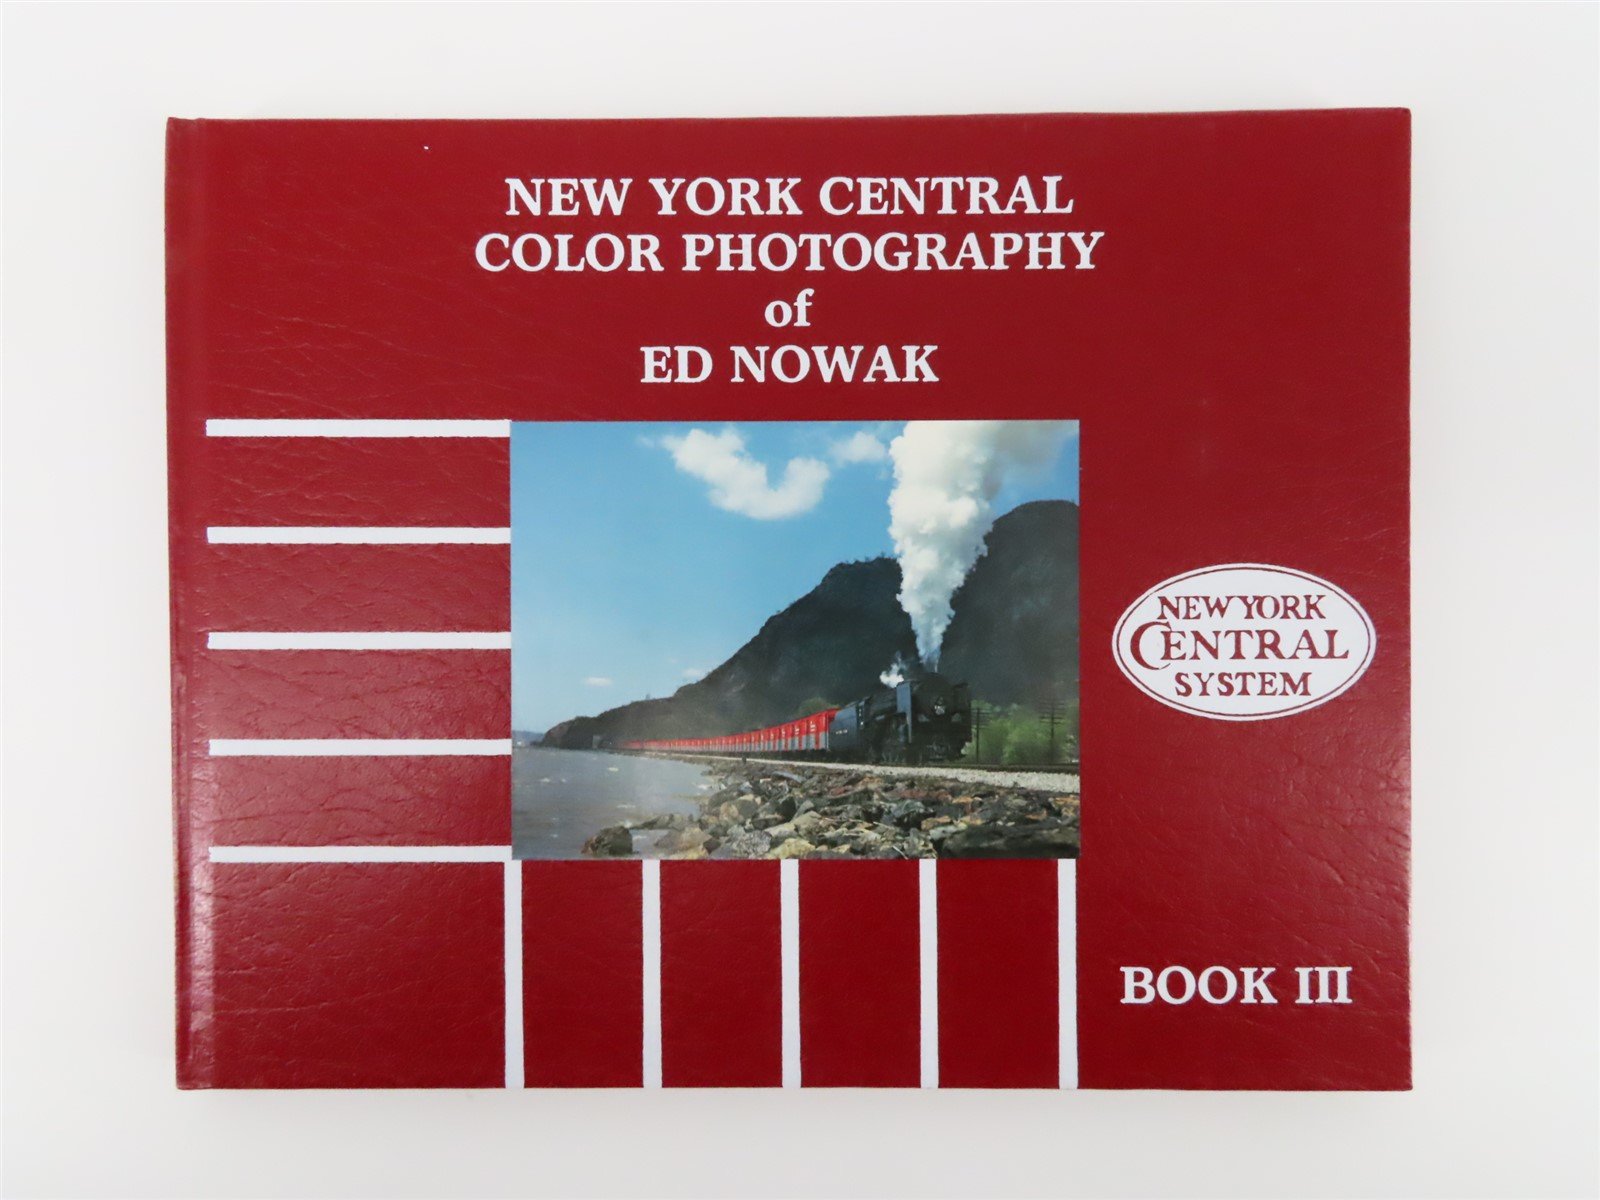 Morning Sun Books New York Central Color Photography of Ed Nowak Book III ©1993